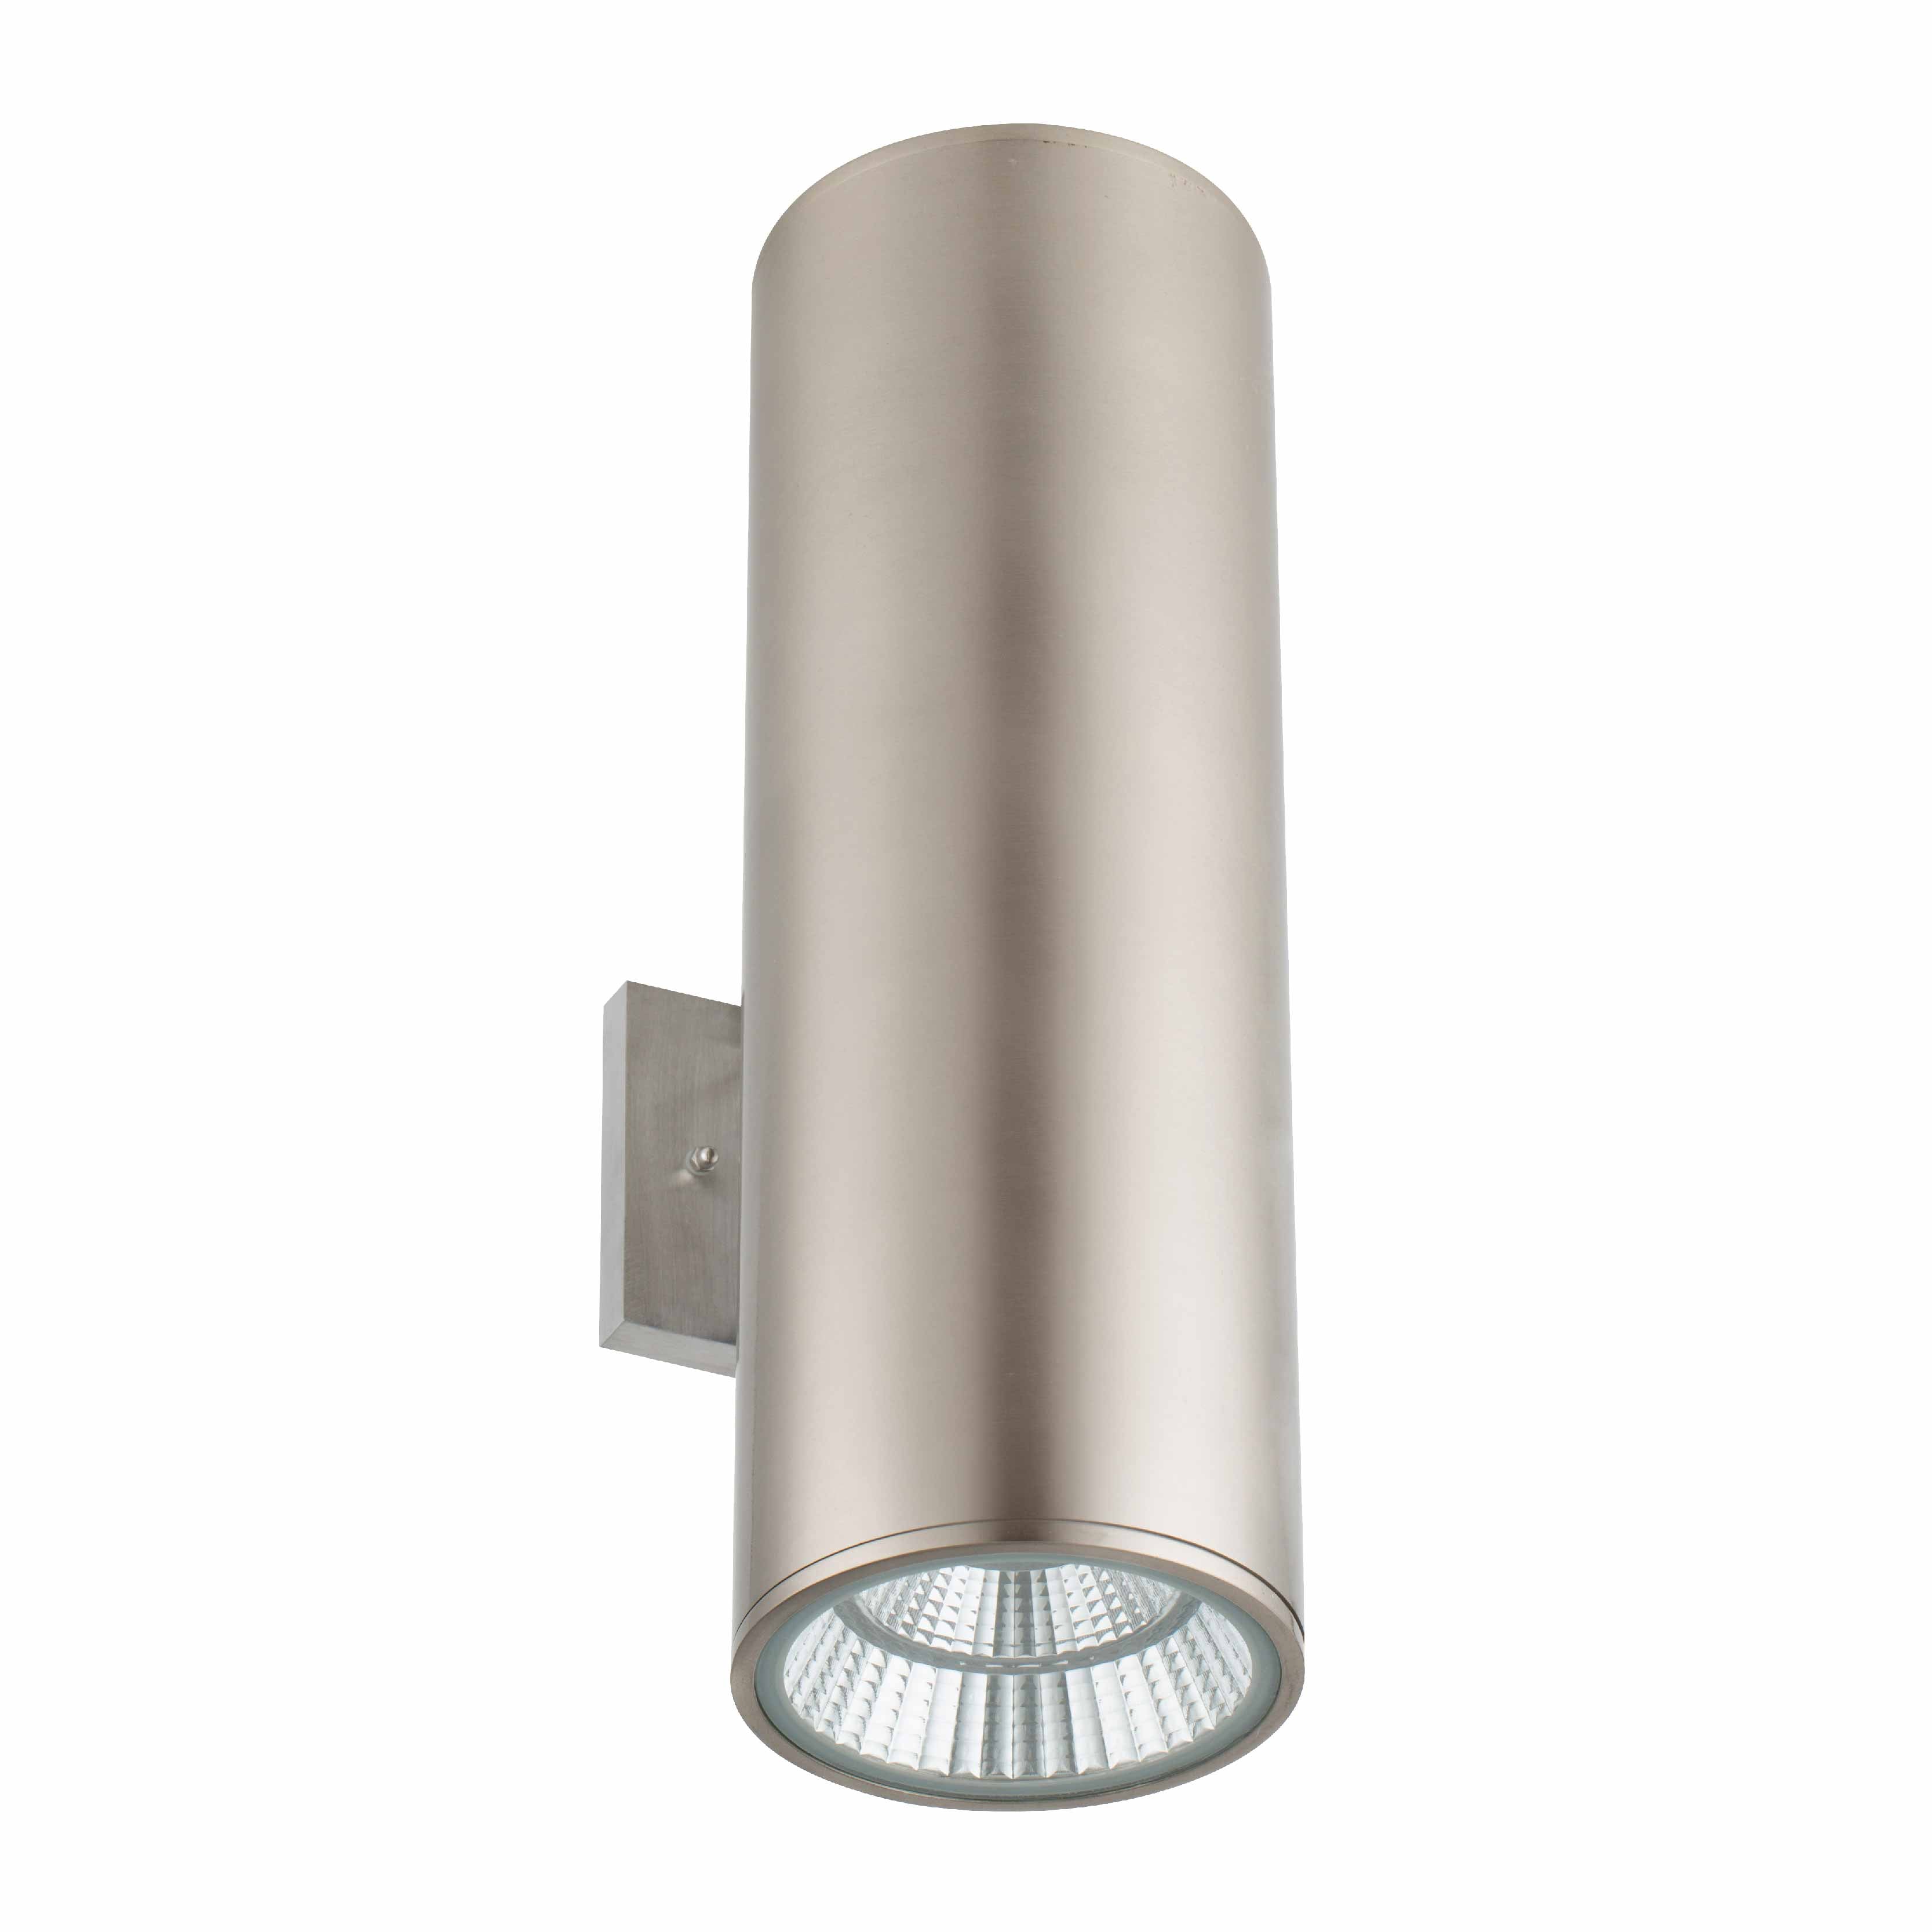 6" 40W 120-277V CCT-Adjustable Outdoor LED Cylinder Up/Down Light - Multiple Finishes - Sonic Electric